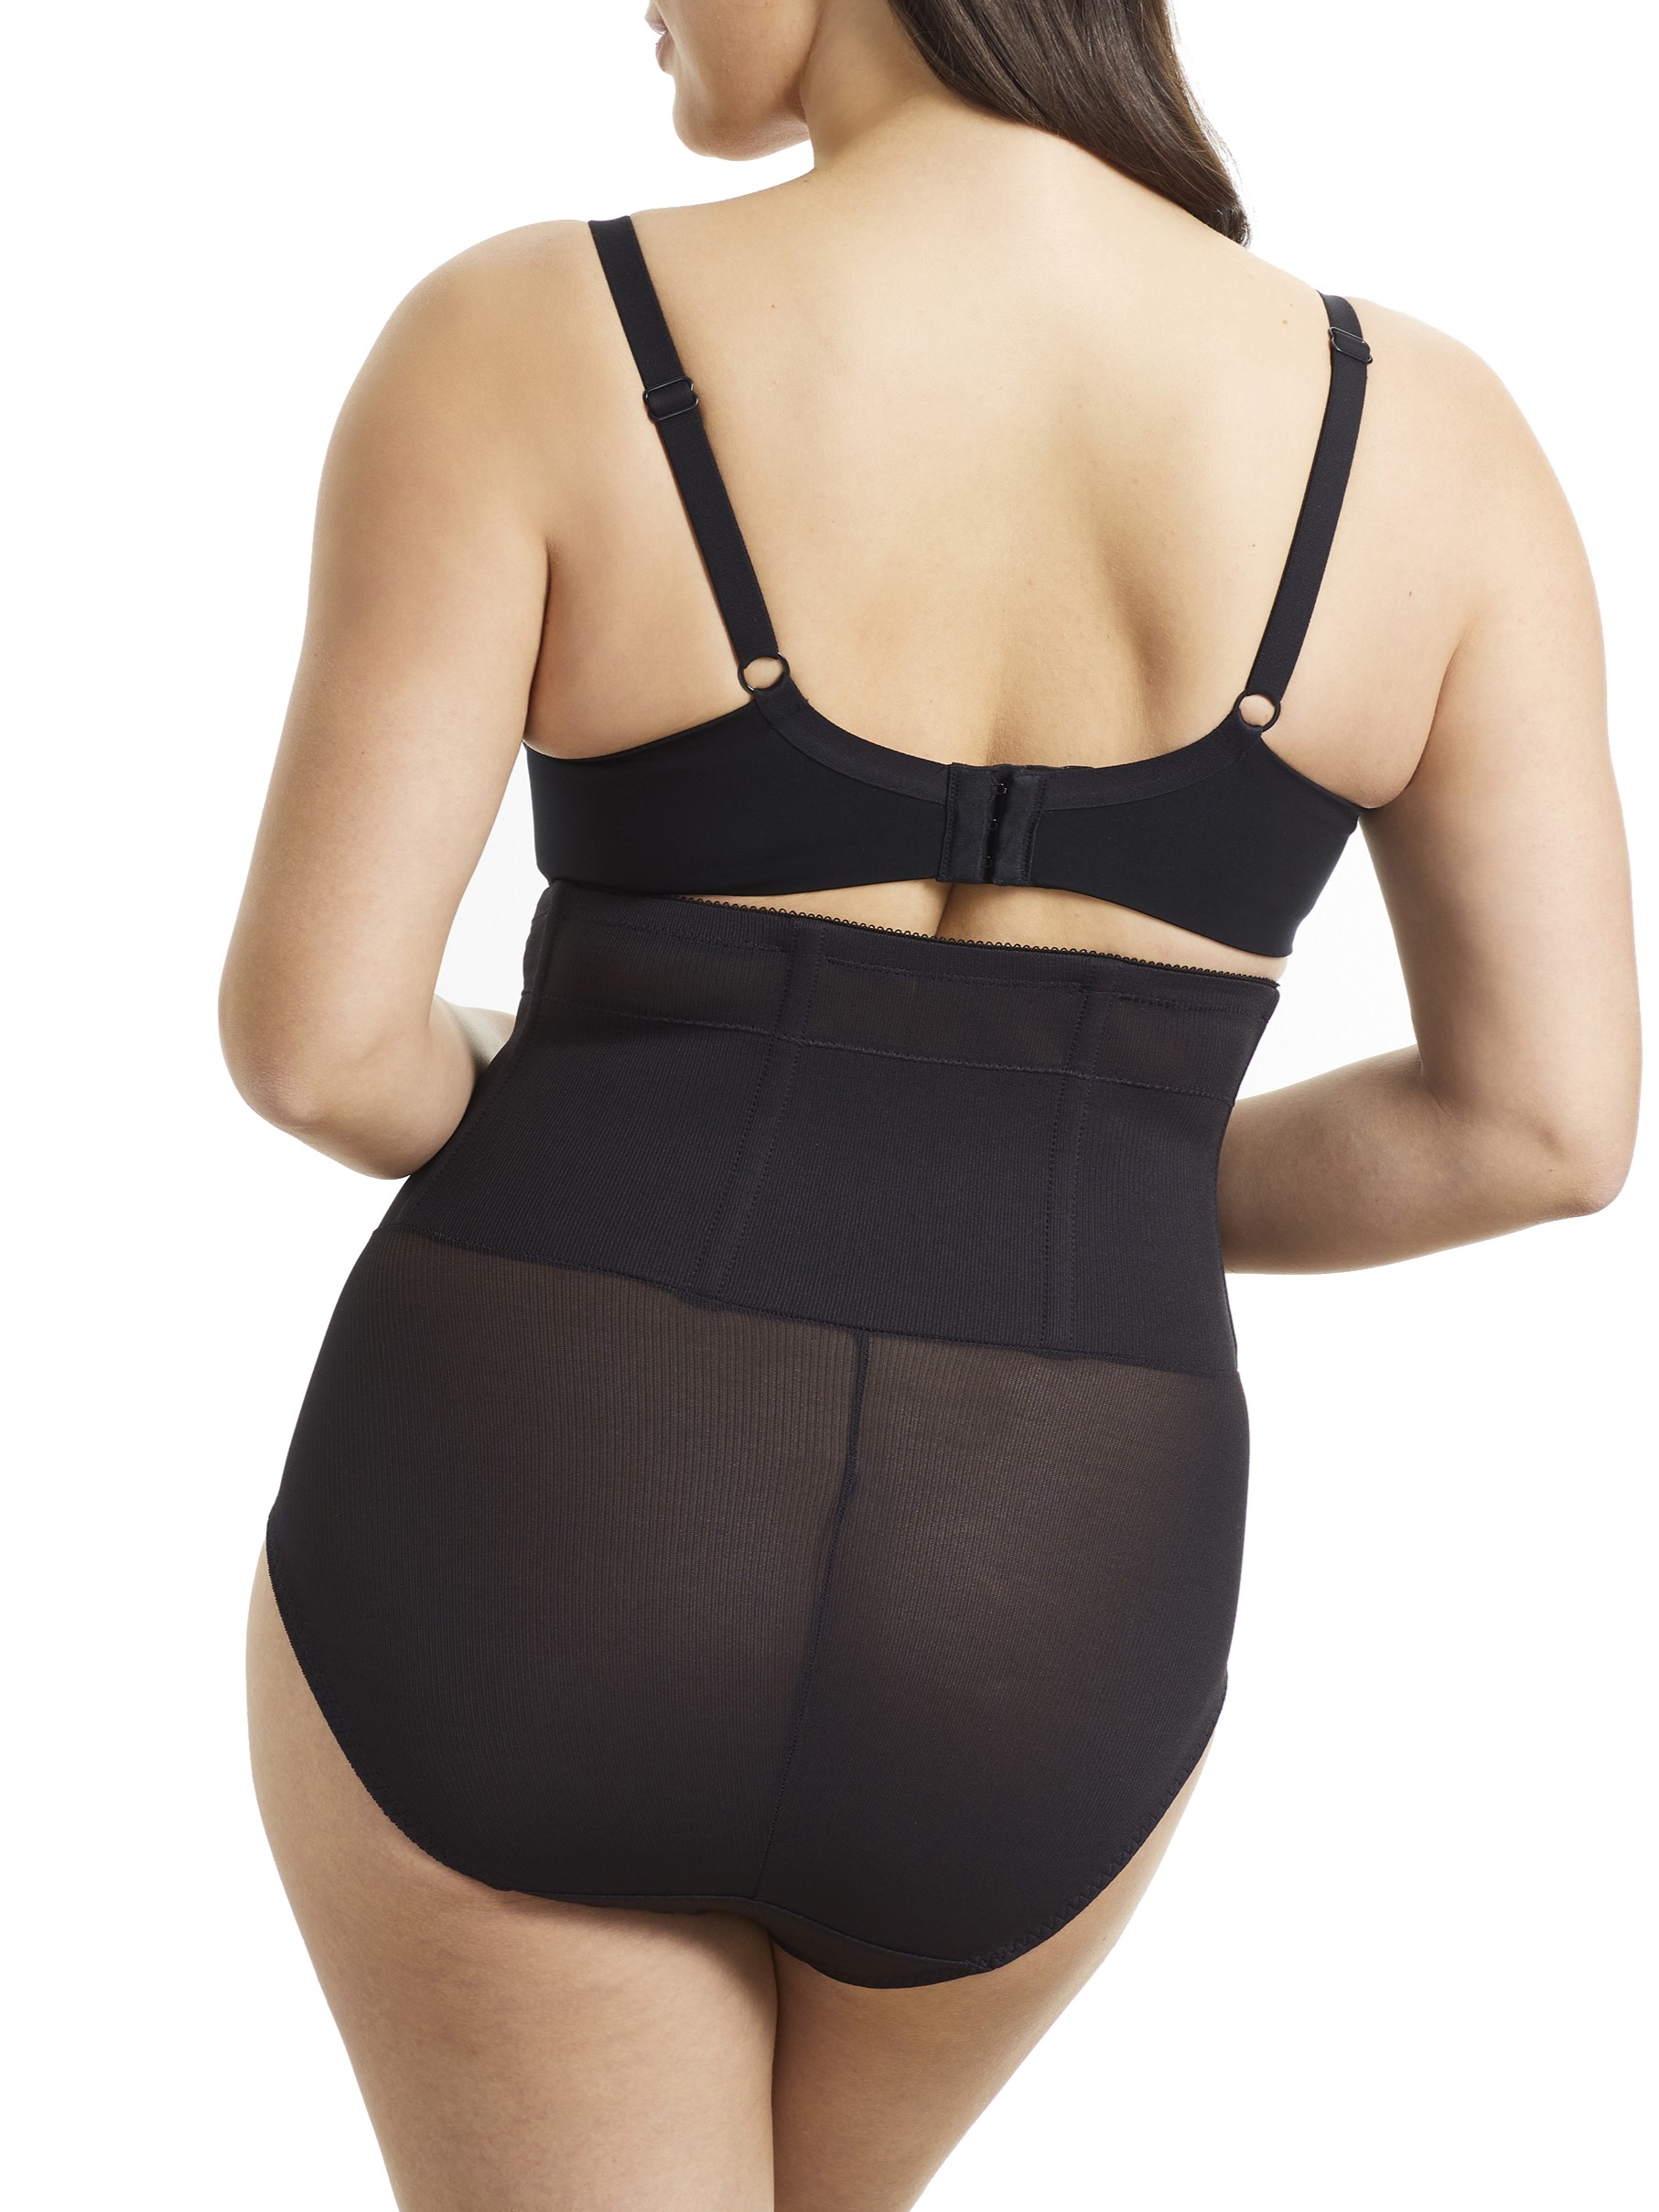 Cupid Women's Extra Firm Control Waist Cinching Shapewear Brief with Satin Deluster Panels - image 2 of 3